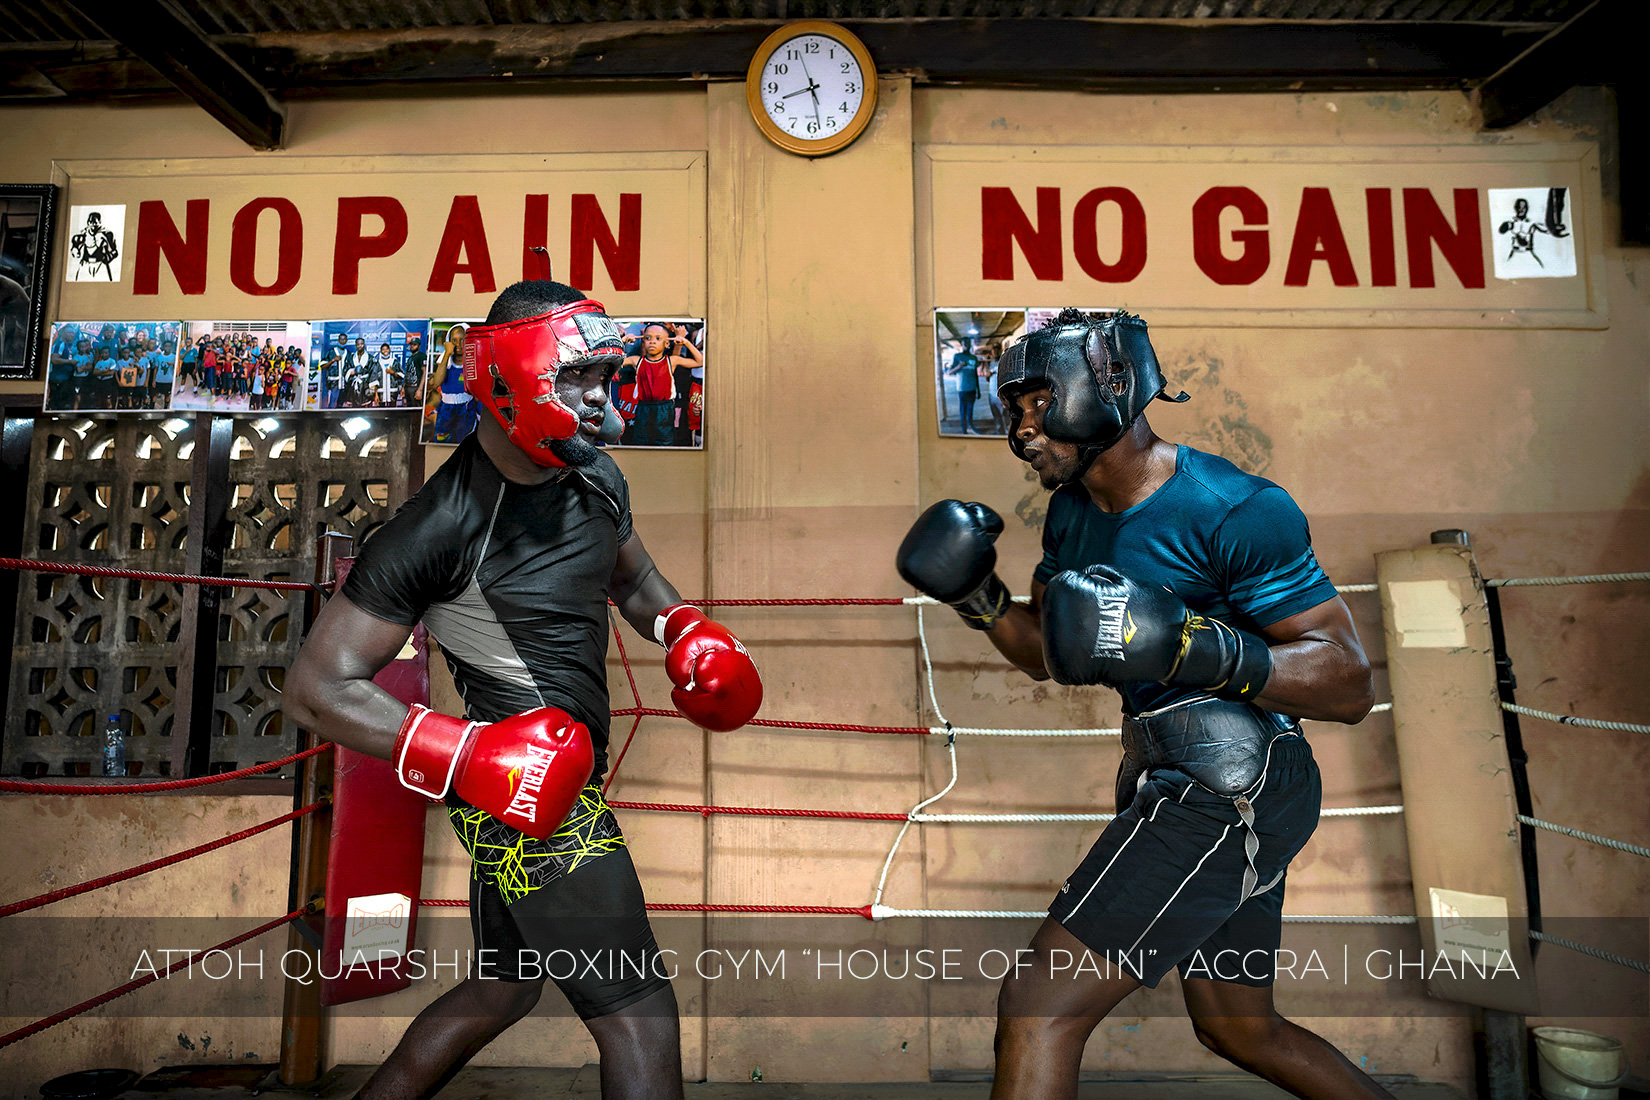 ATTOH QUARSHIE BOXING GYM "HOUSE OF PAIN" ACCRA | GHANA